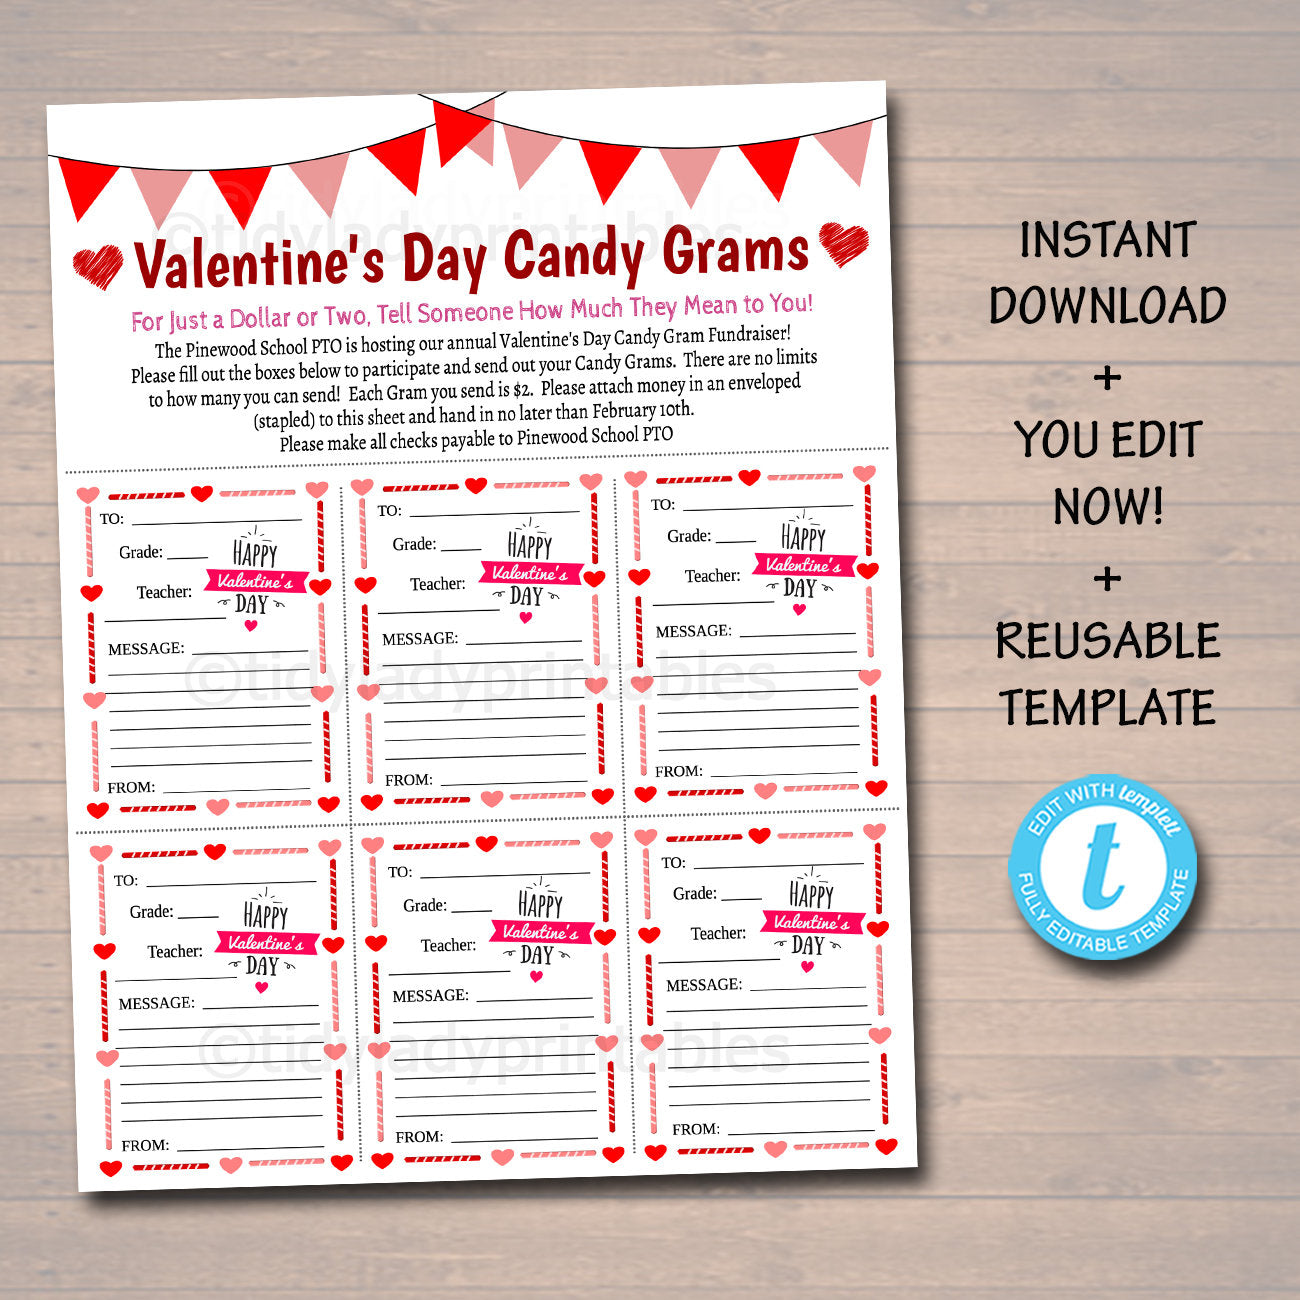 valentine-s-day-candy-gram-flyer-school-fundraiser-template-tidylady